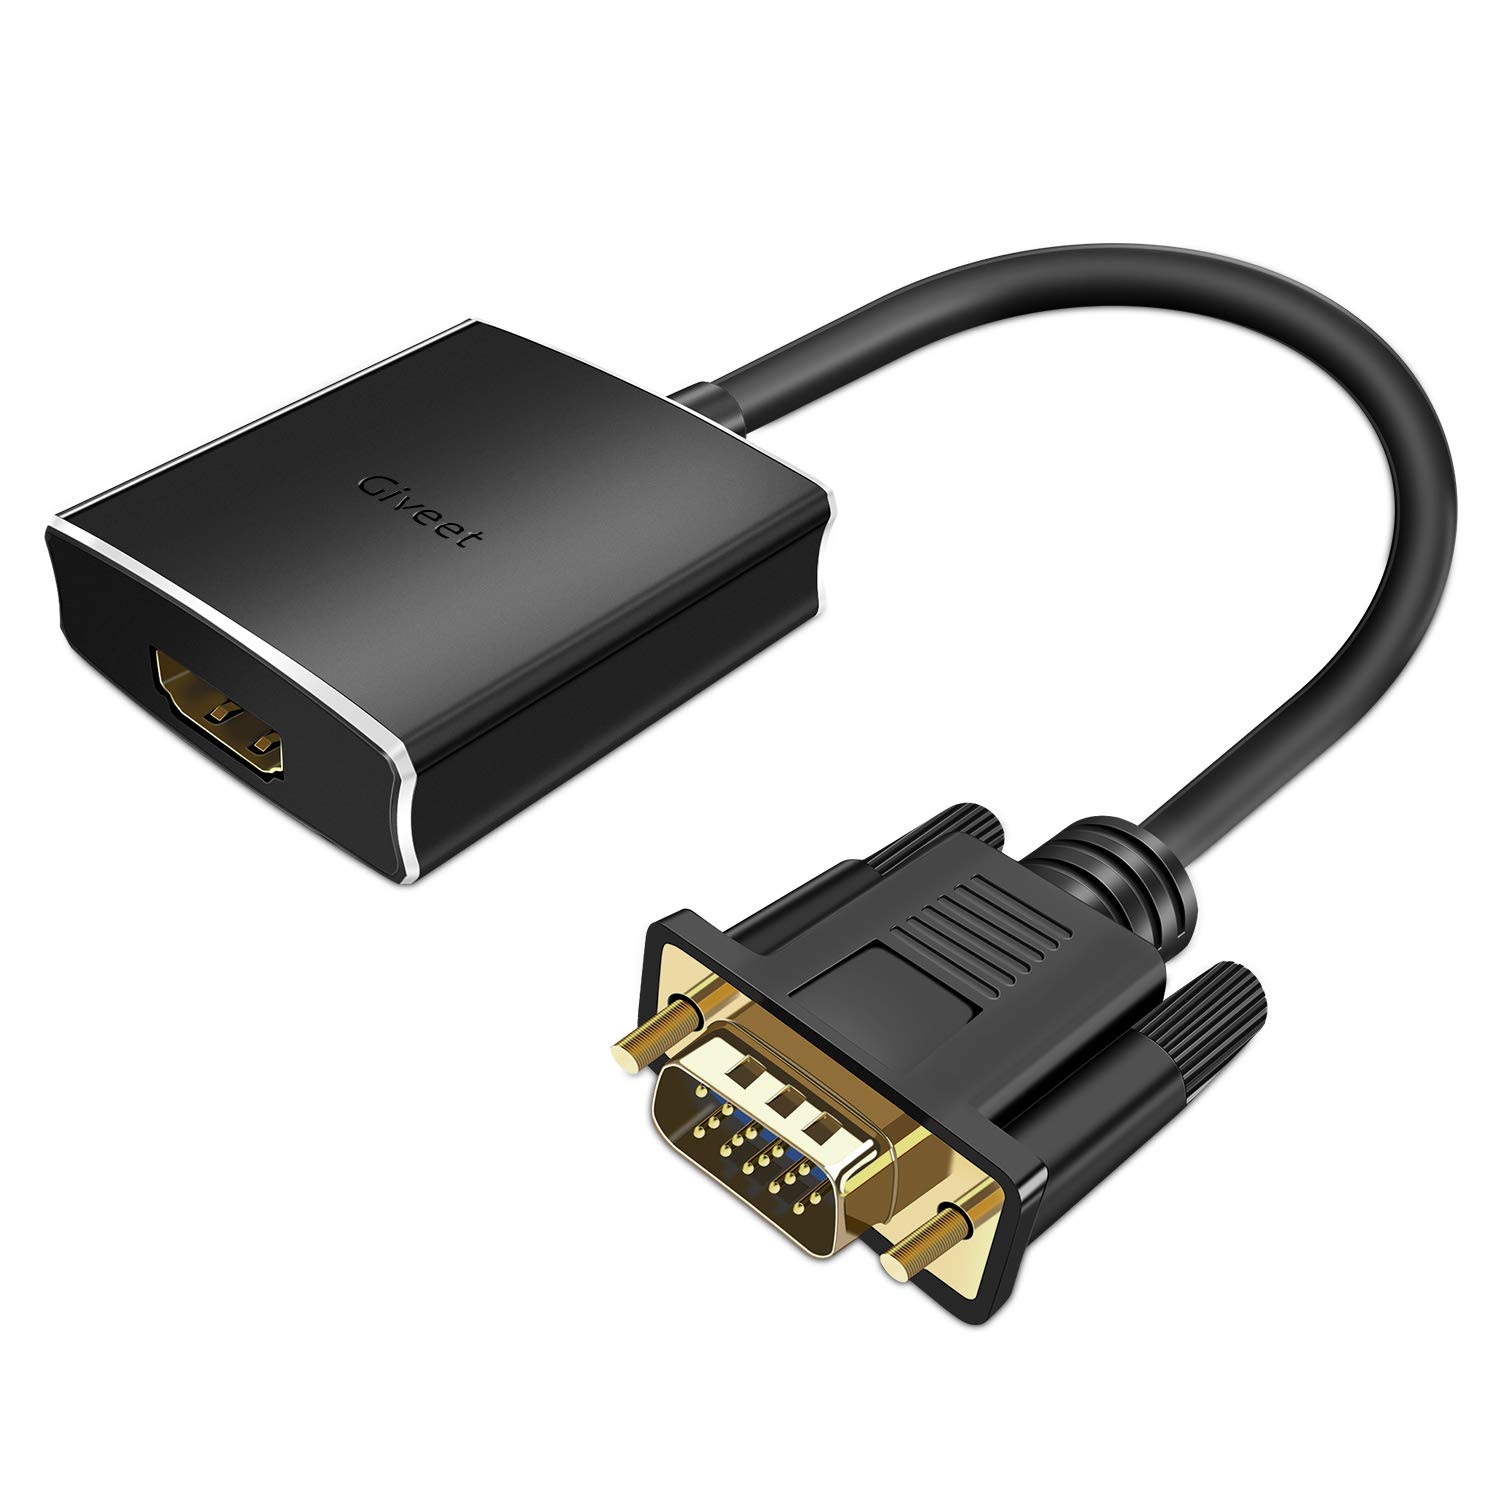 Ensure that the power cables are firmly connected to both the computer and the monitor.
Confirm that the HDMI, VGA, or DVI cable is properly connected to the appropriate ports.